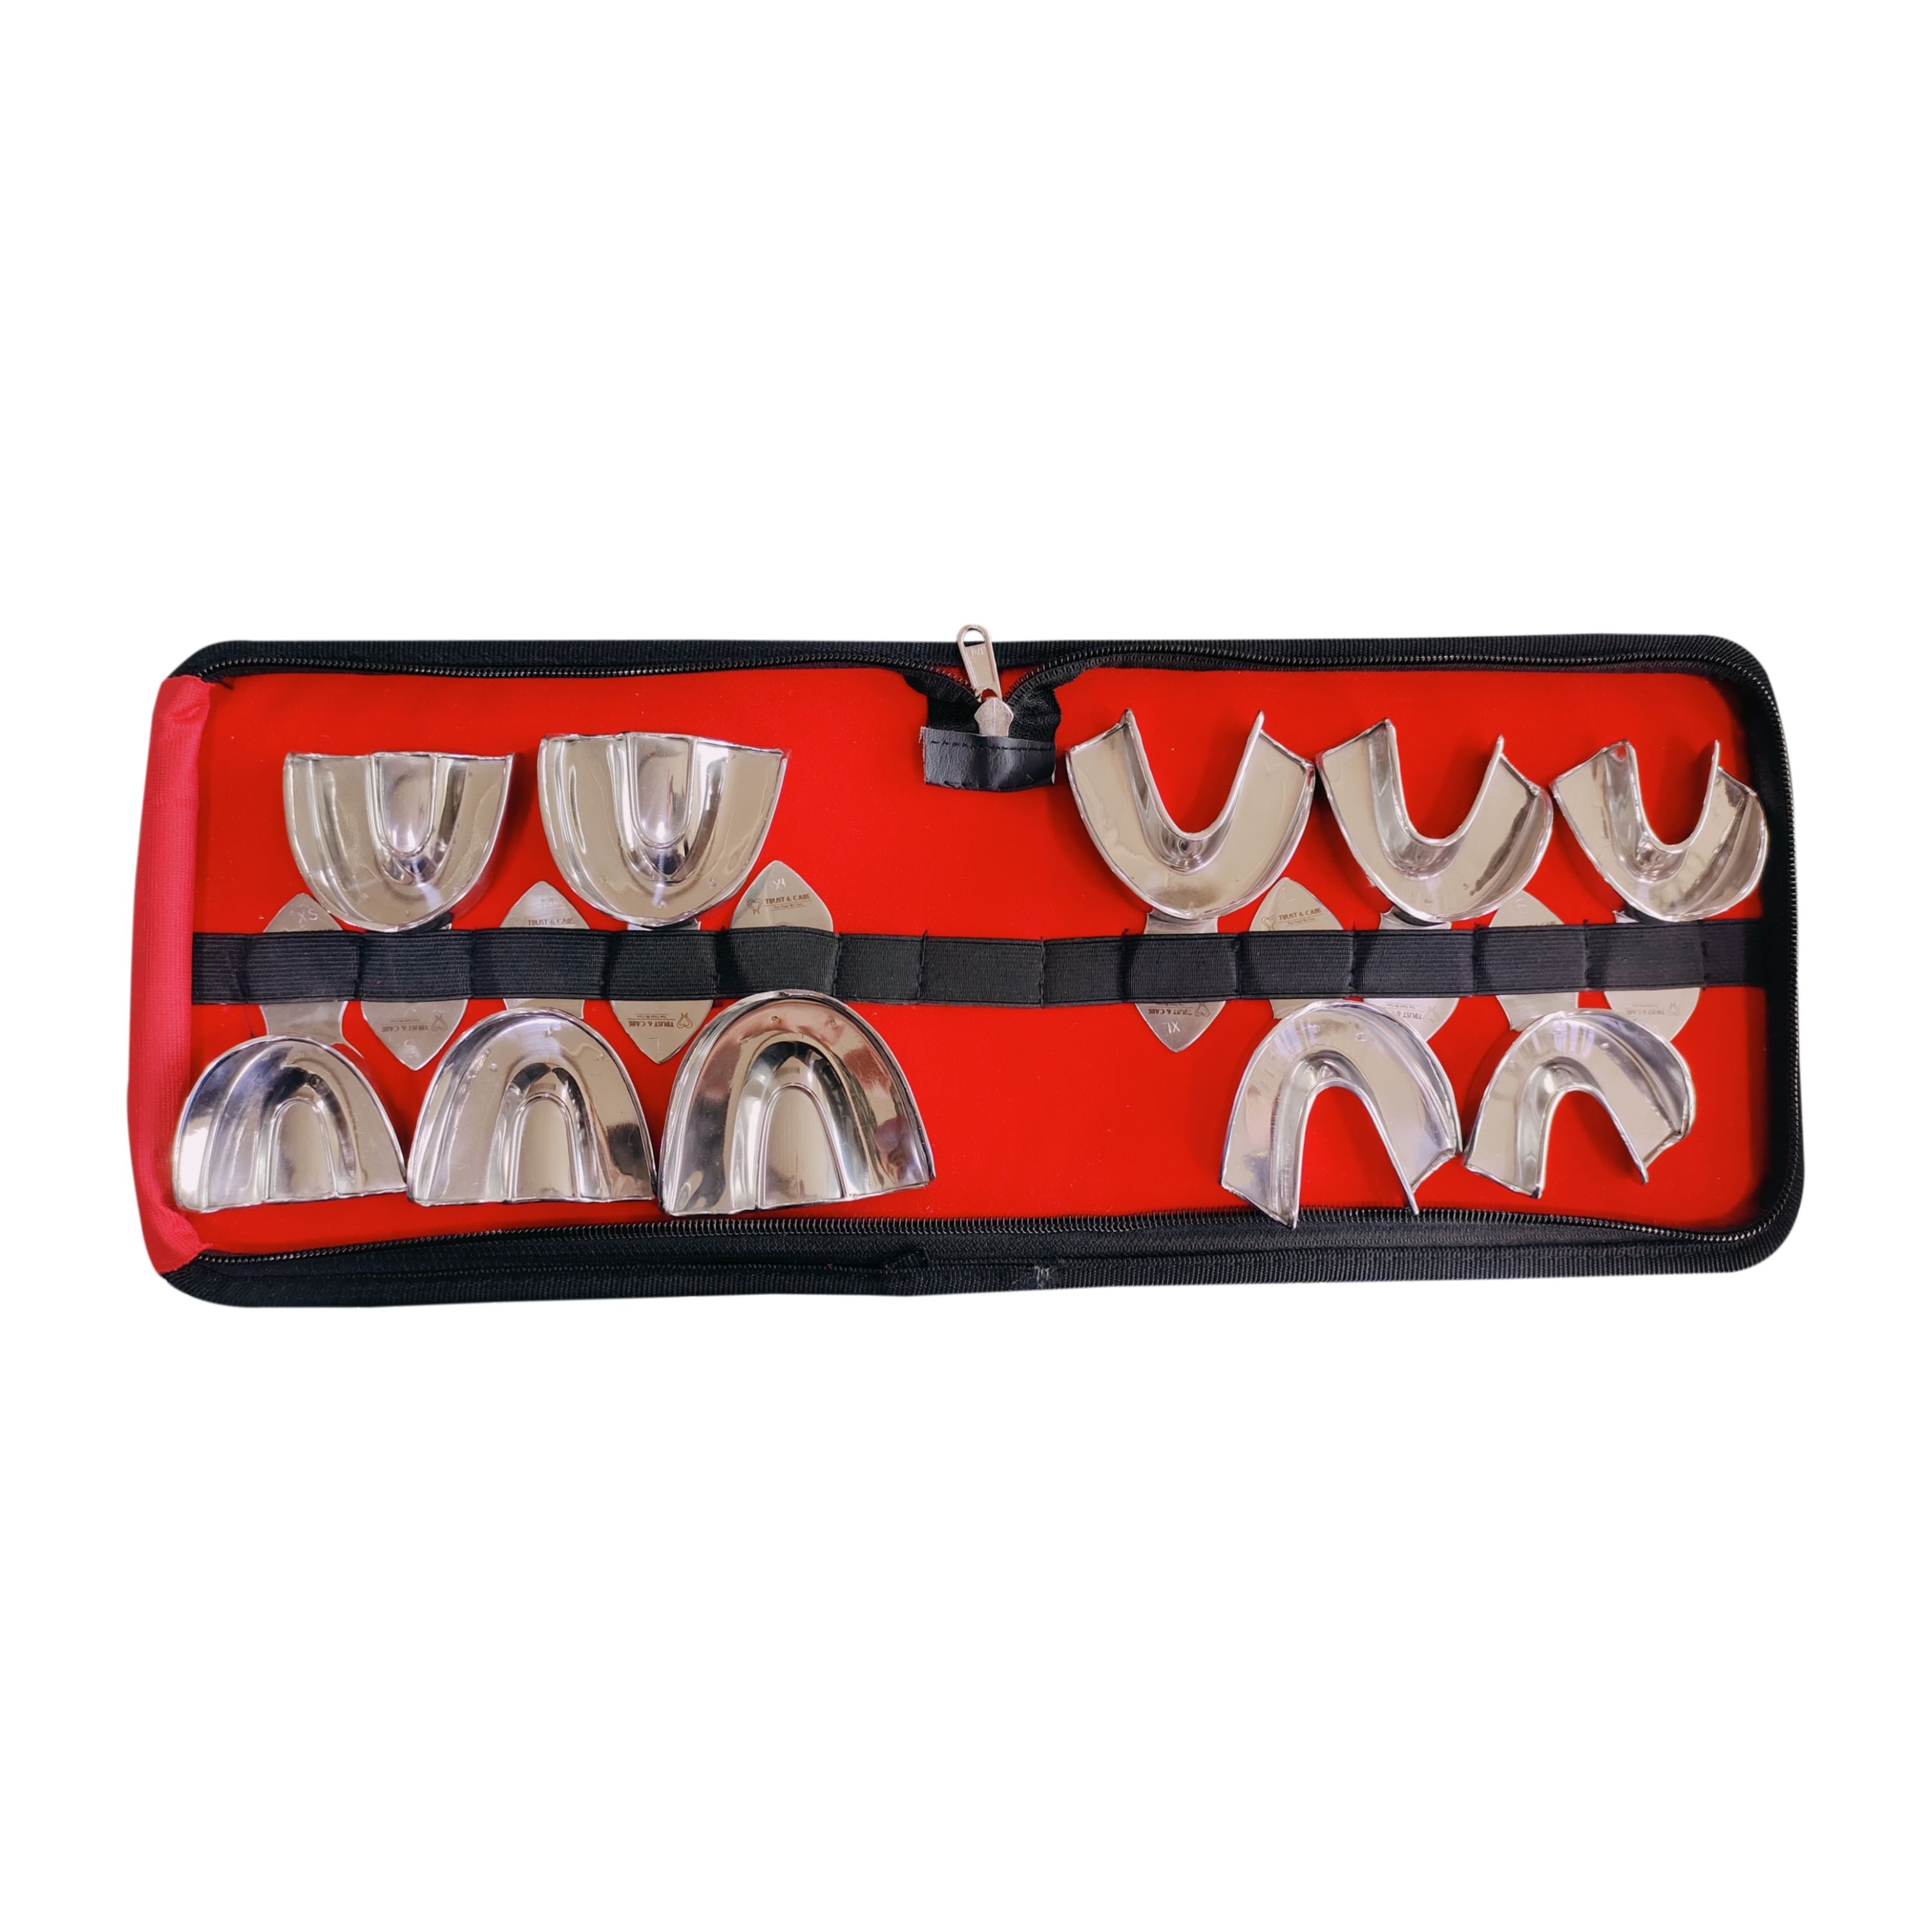 Trust & Care Dentulous Non-Perforated Impression Trays Set Of 10-Pcs